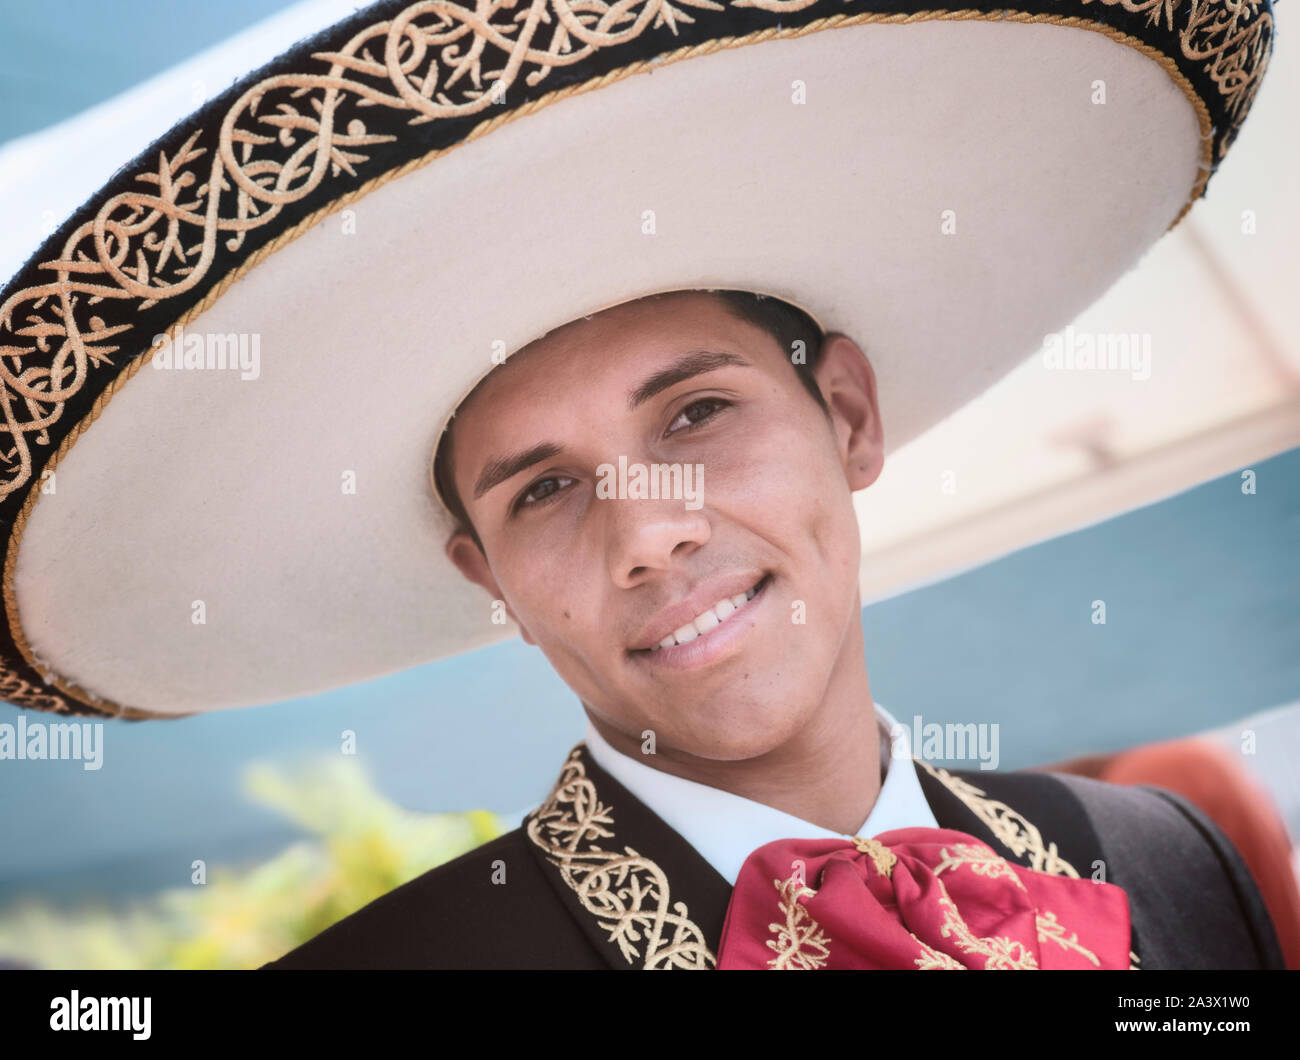 Puerto Vallarta, Mexico - April 30, 2011: Close Up Of A Man Dressed In  Traditional Mexican Outfit And Wearing Sombrero Stock Photo - Alamy